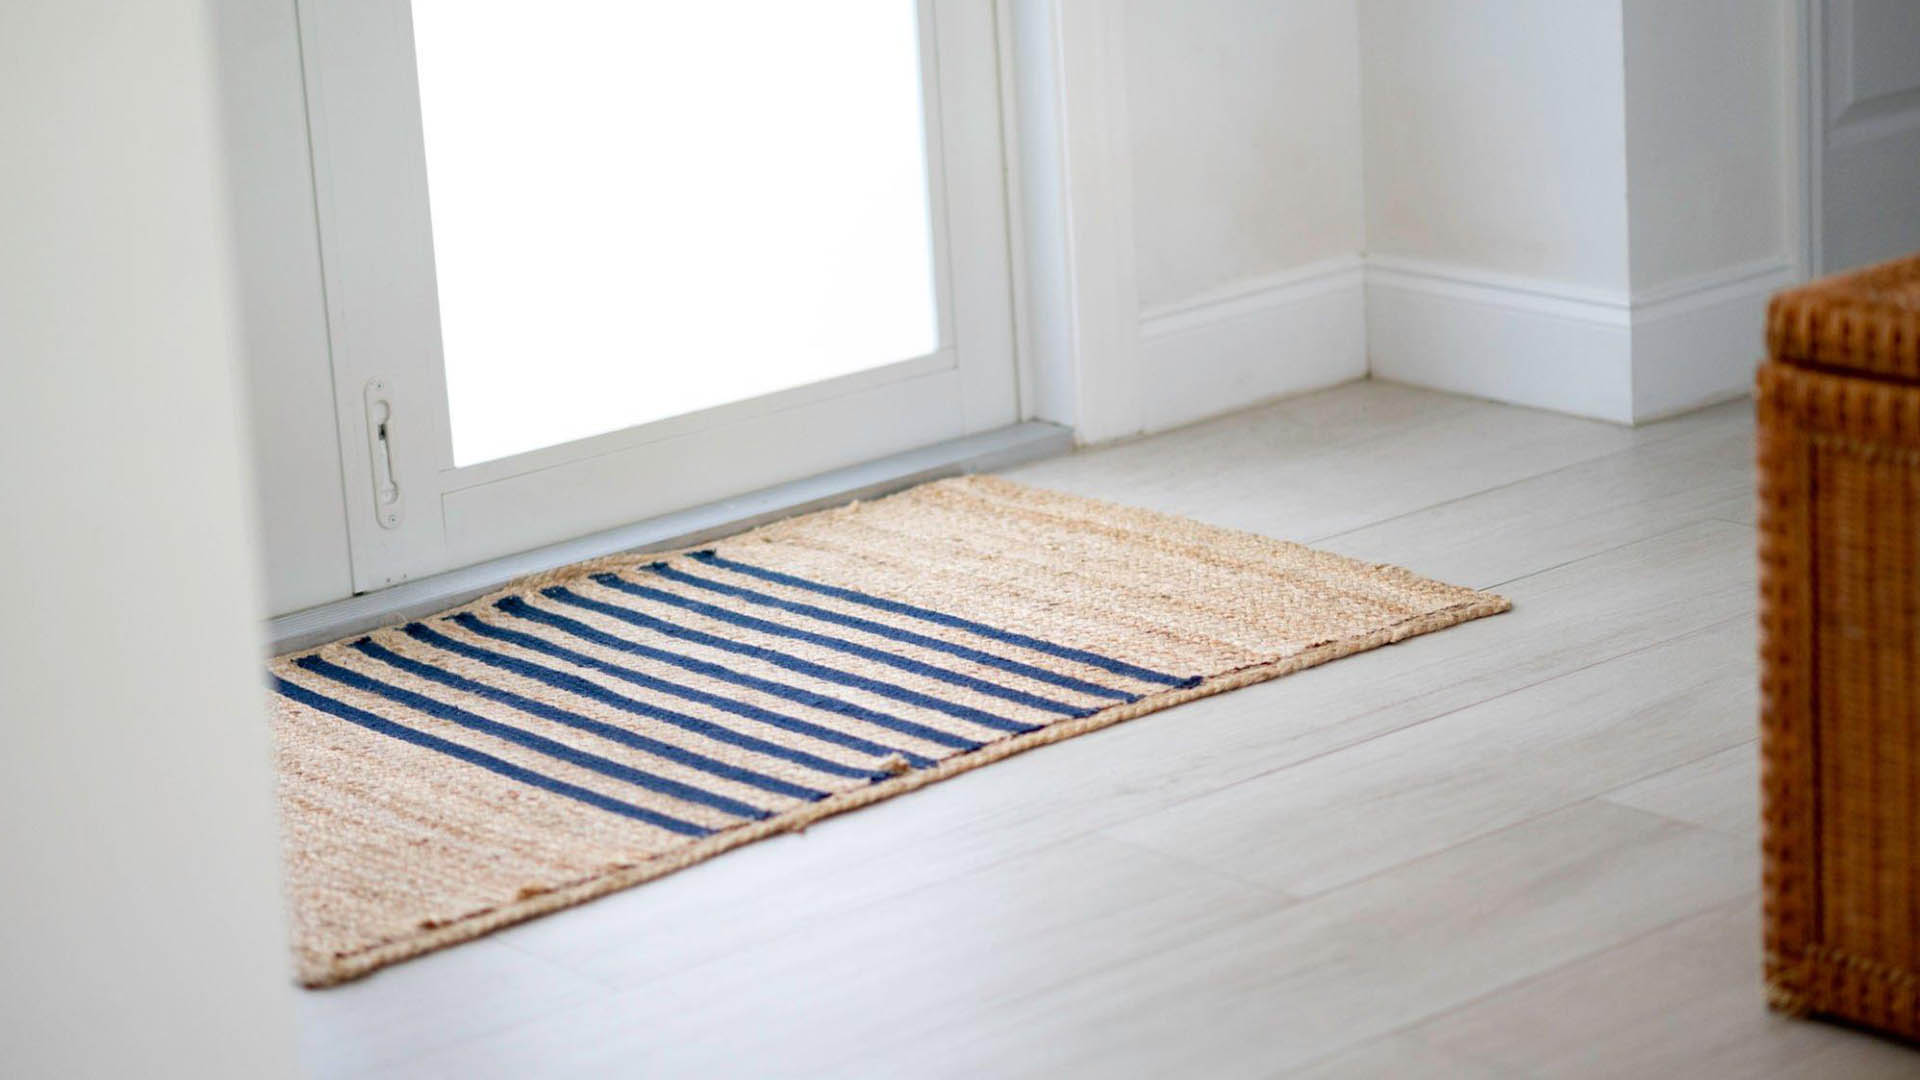 https://www.doormat.net.au/product_images/uploaded_images/examining-indoor-and-outdoor-mat-differences.jpg